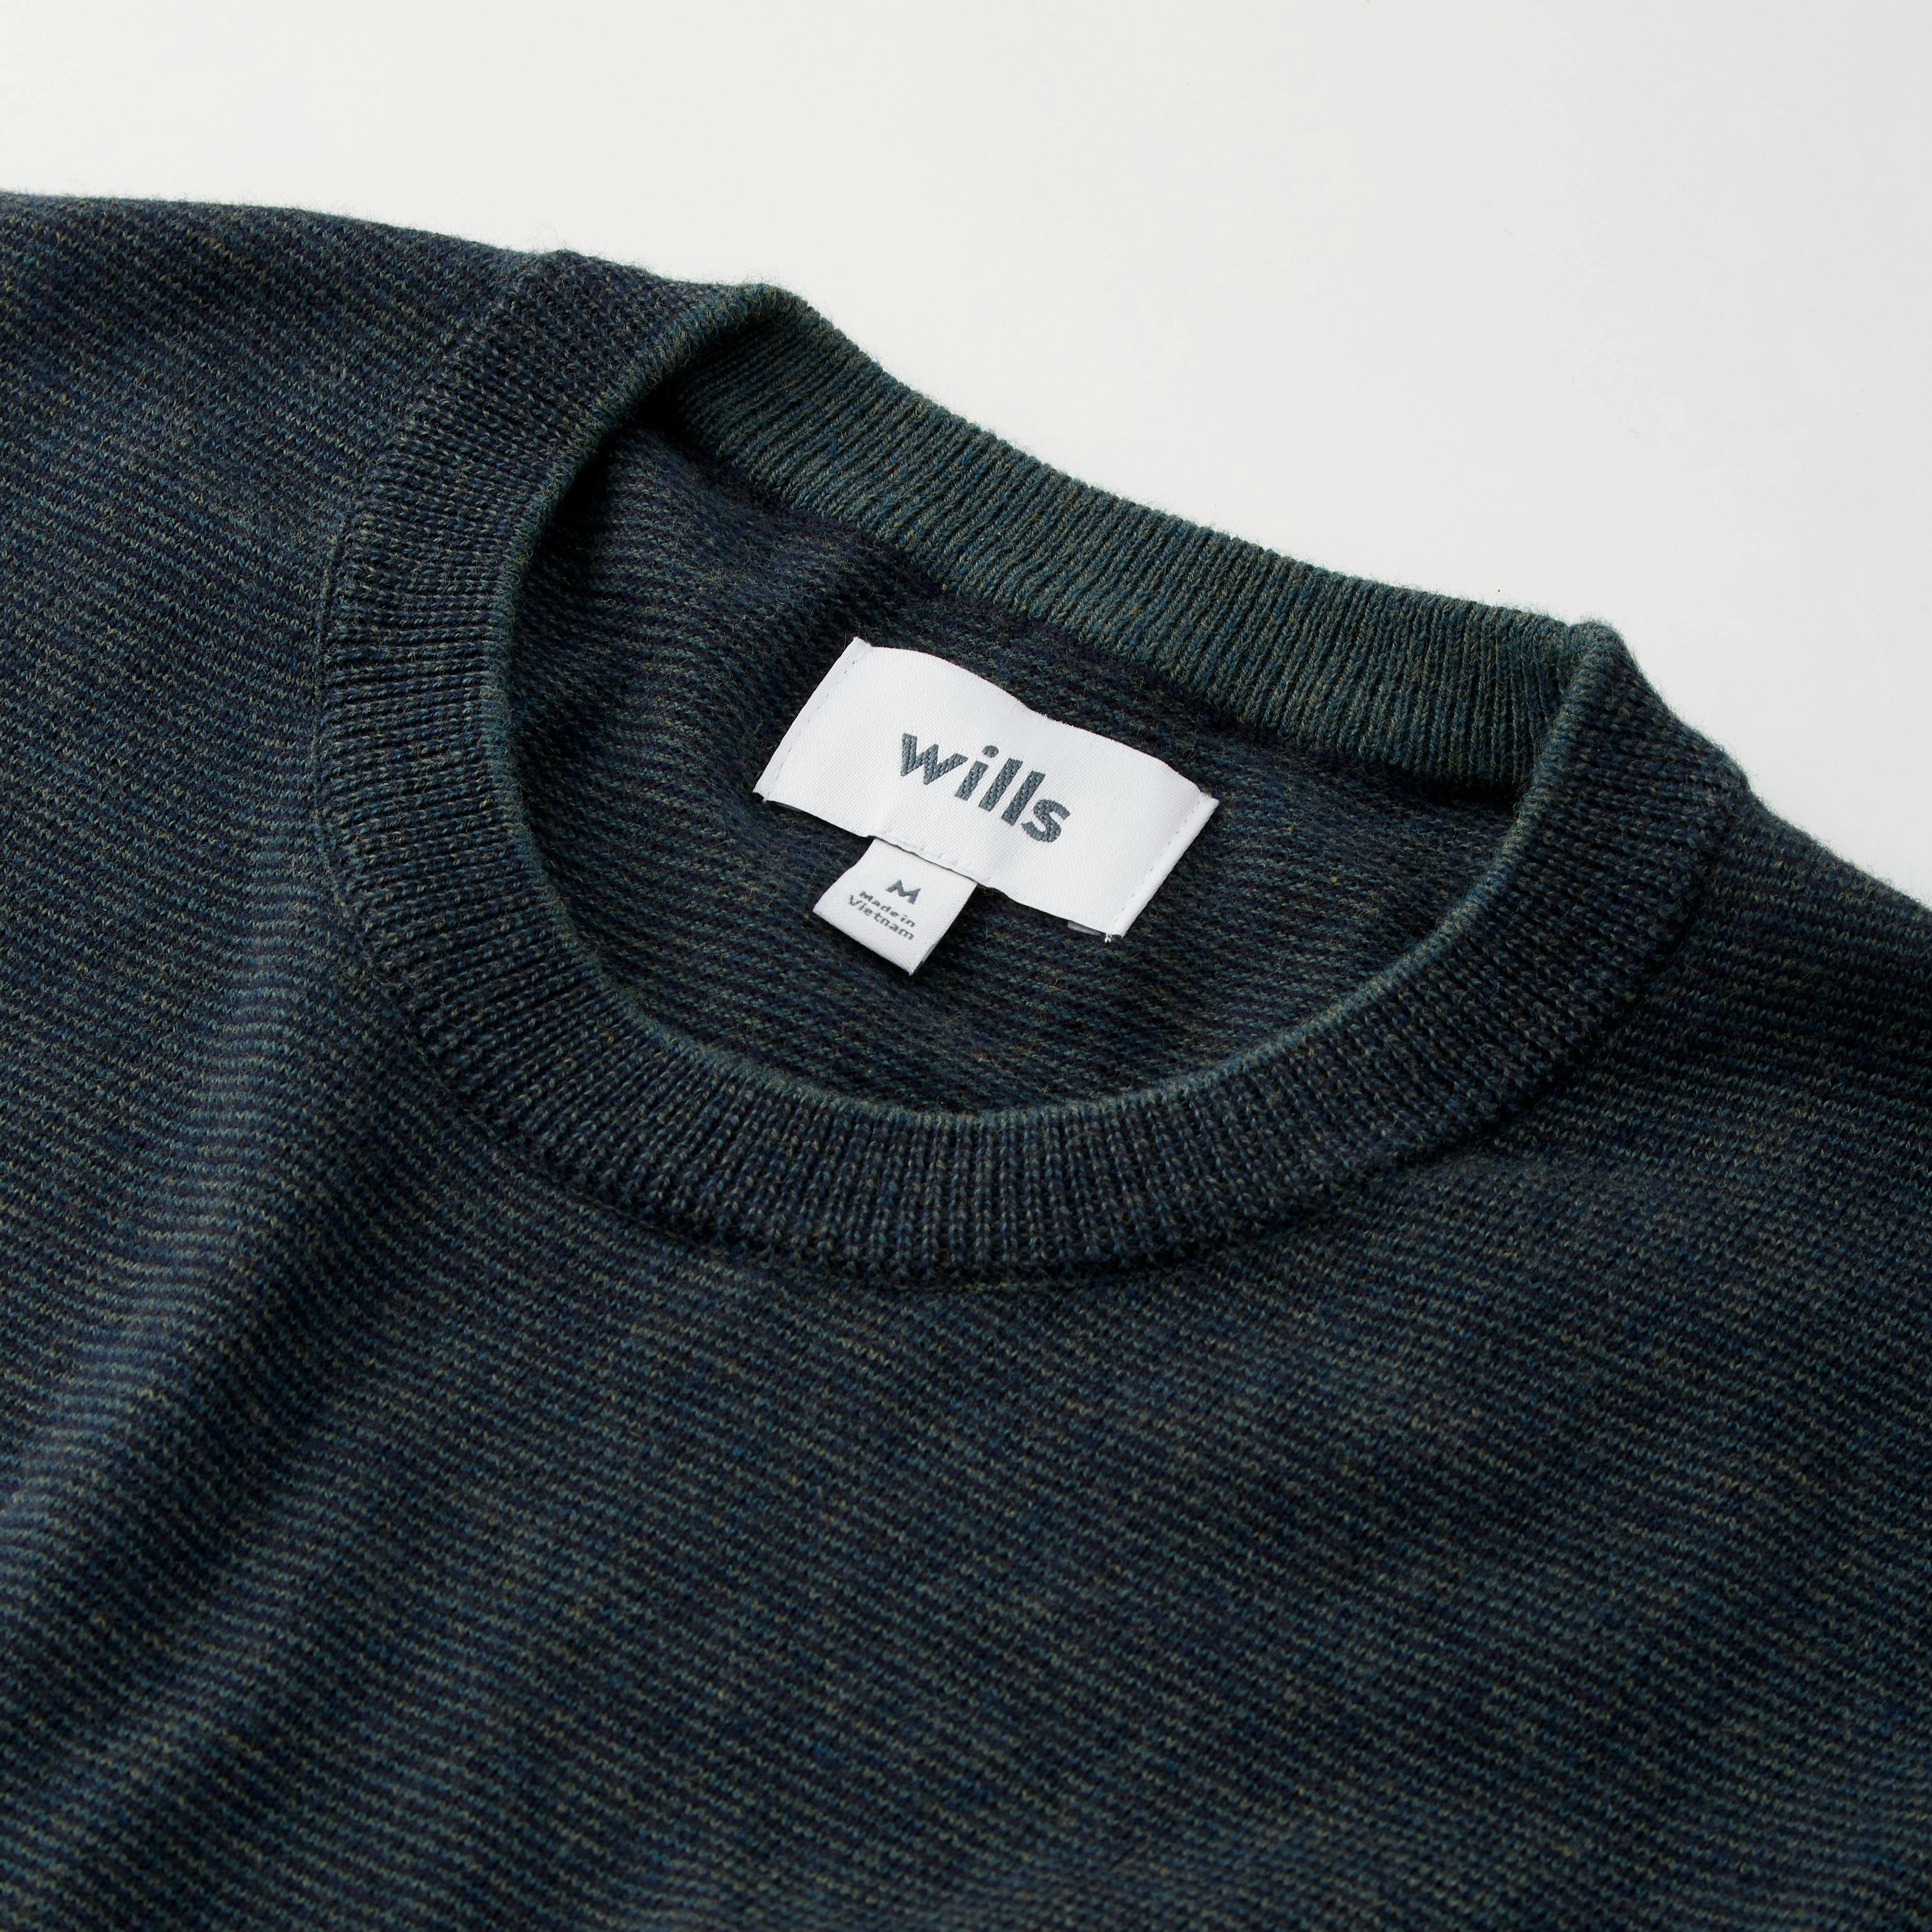 Wills Cotton Cashmere Crewneck Sweater - Green and Navy Micro